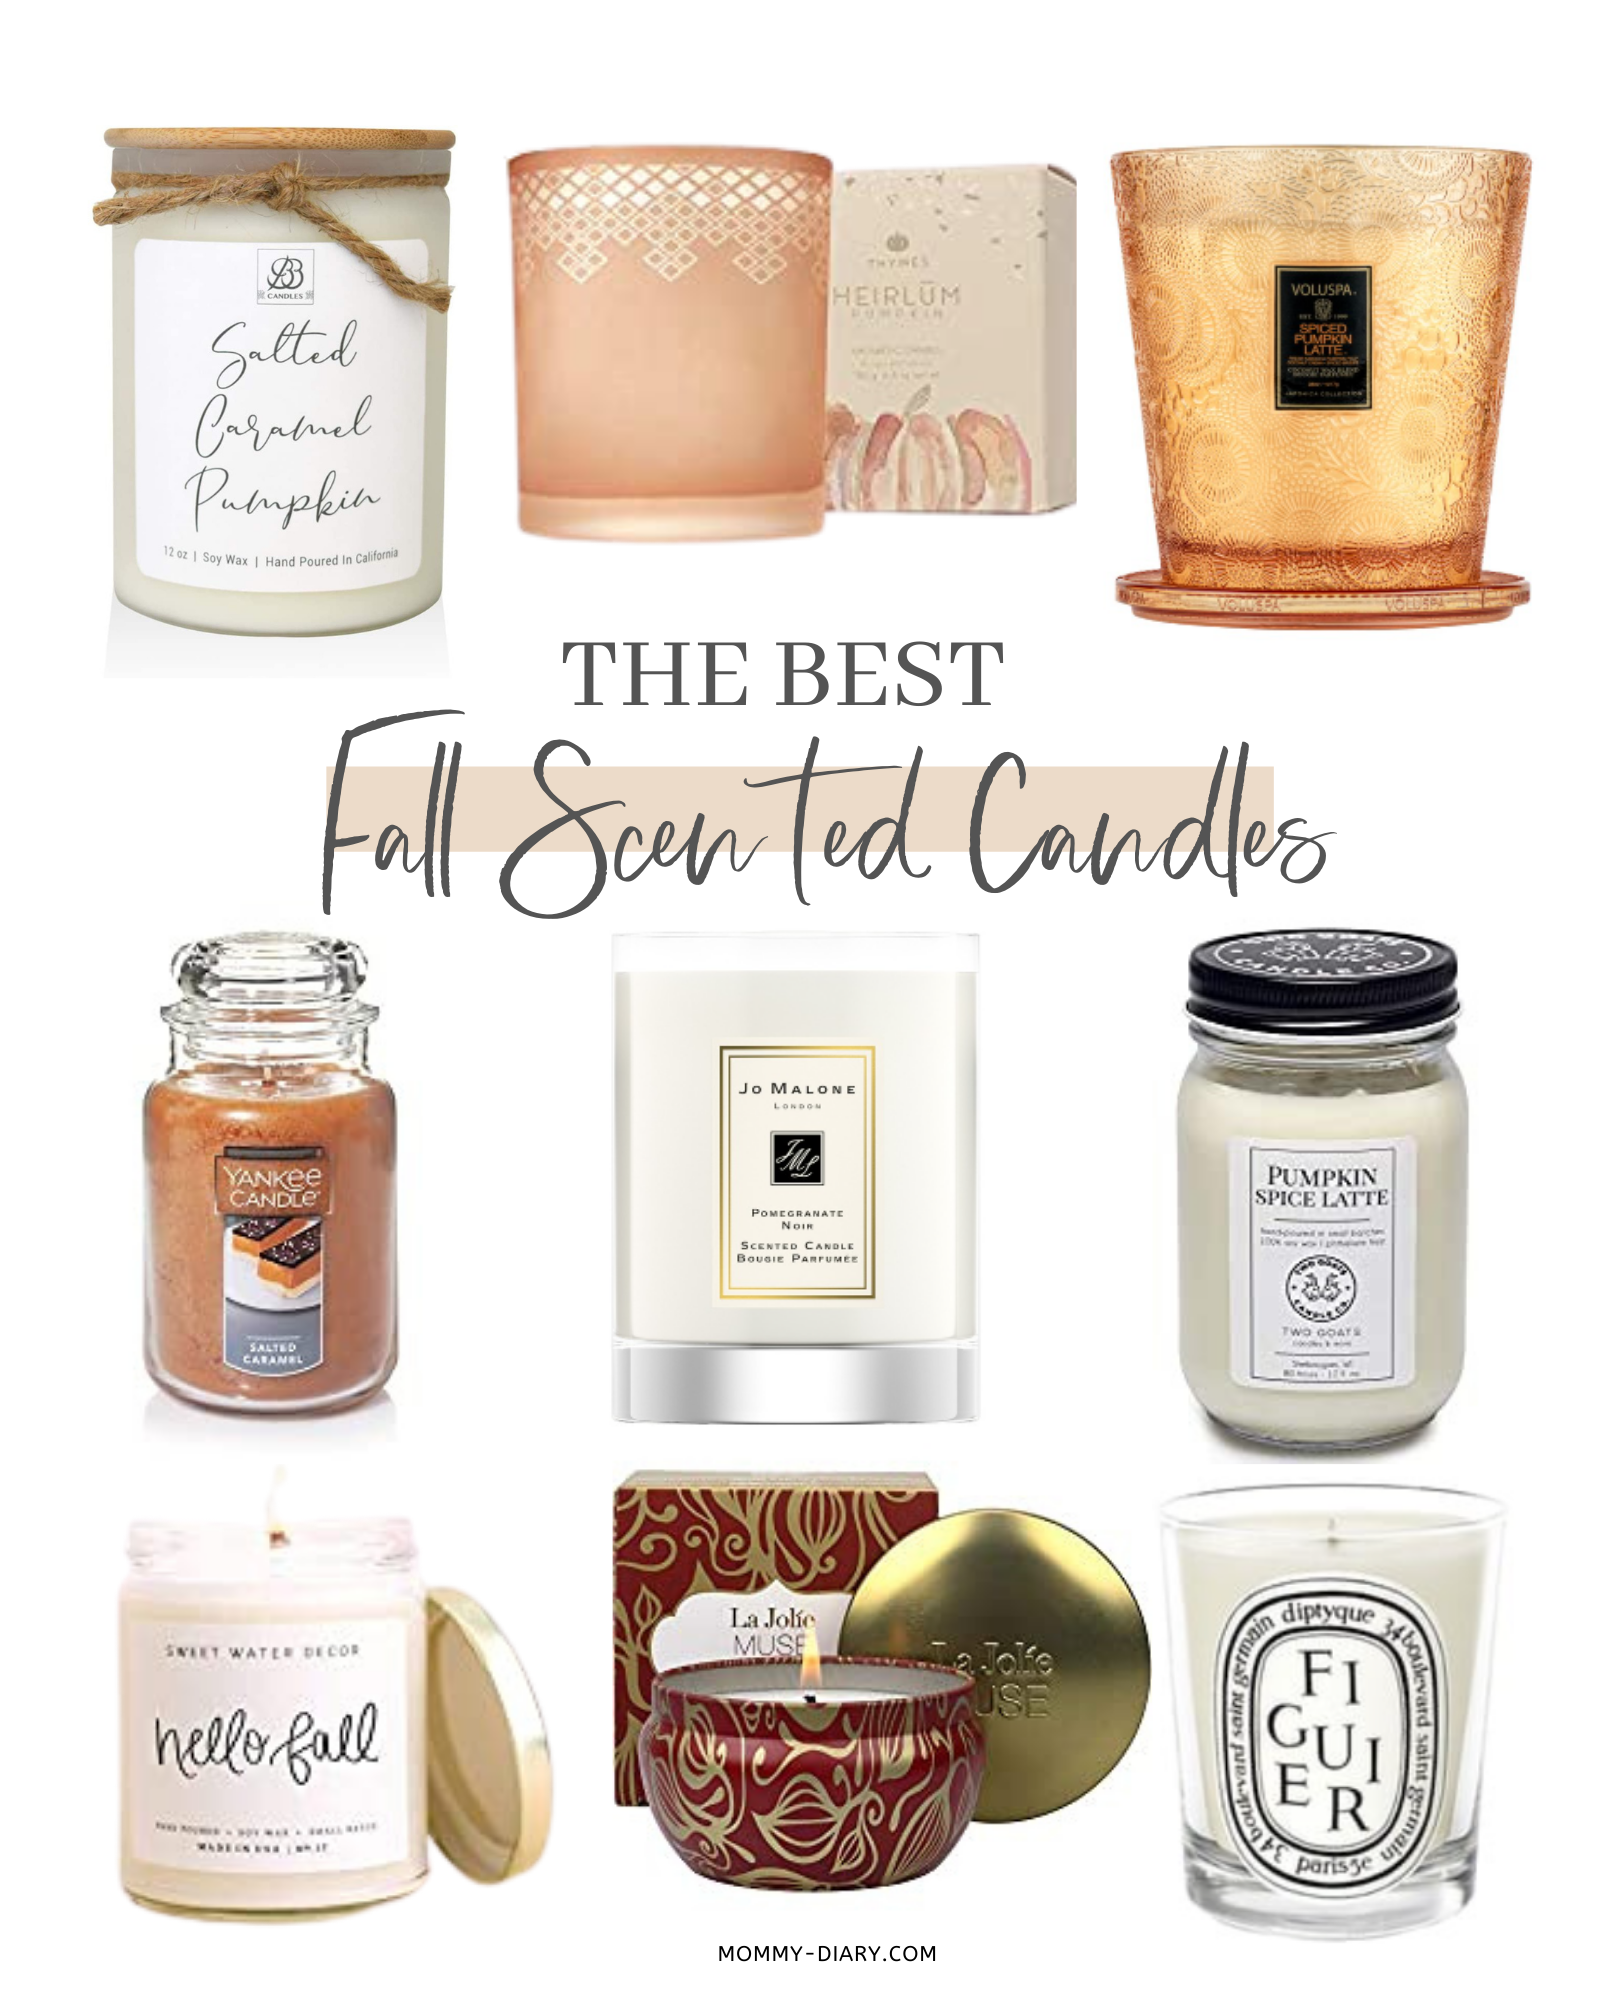 The Best Fall Scented Candles